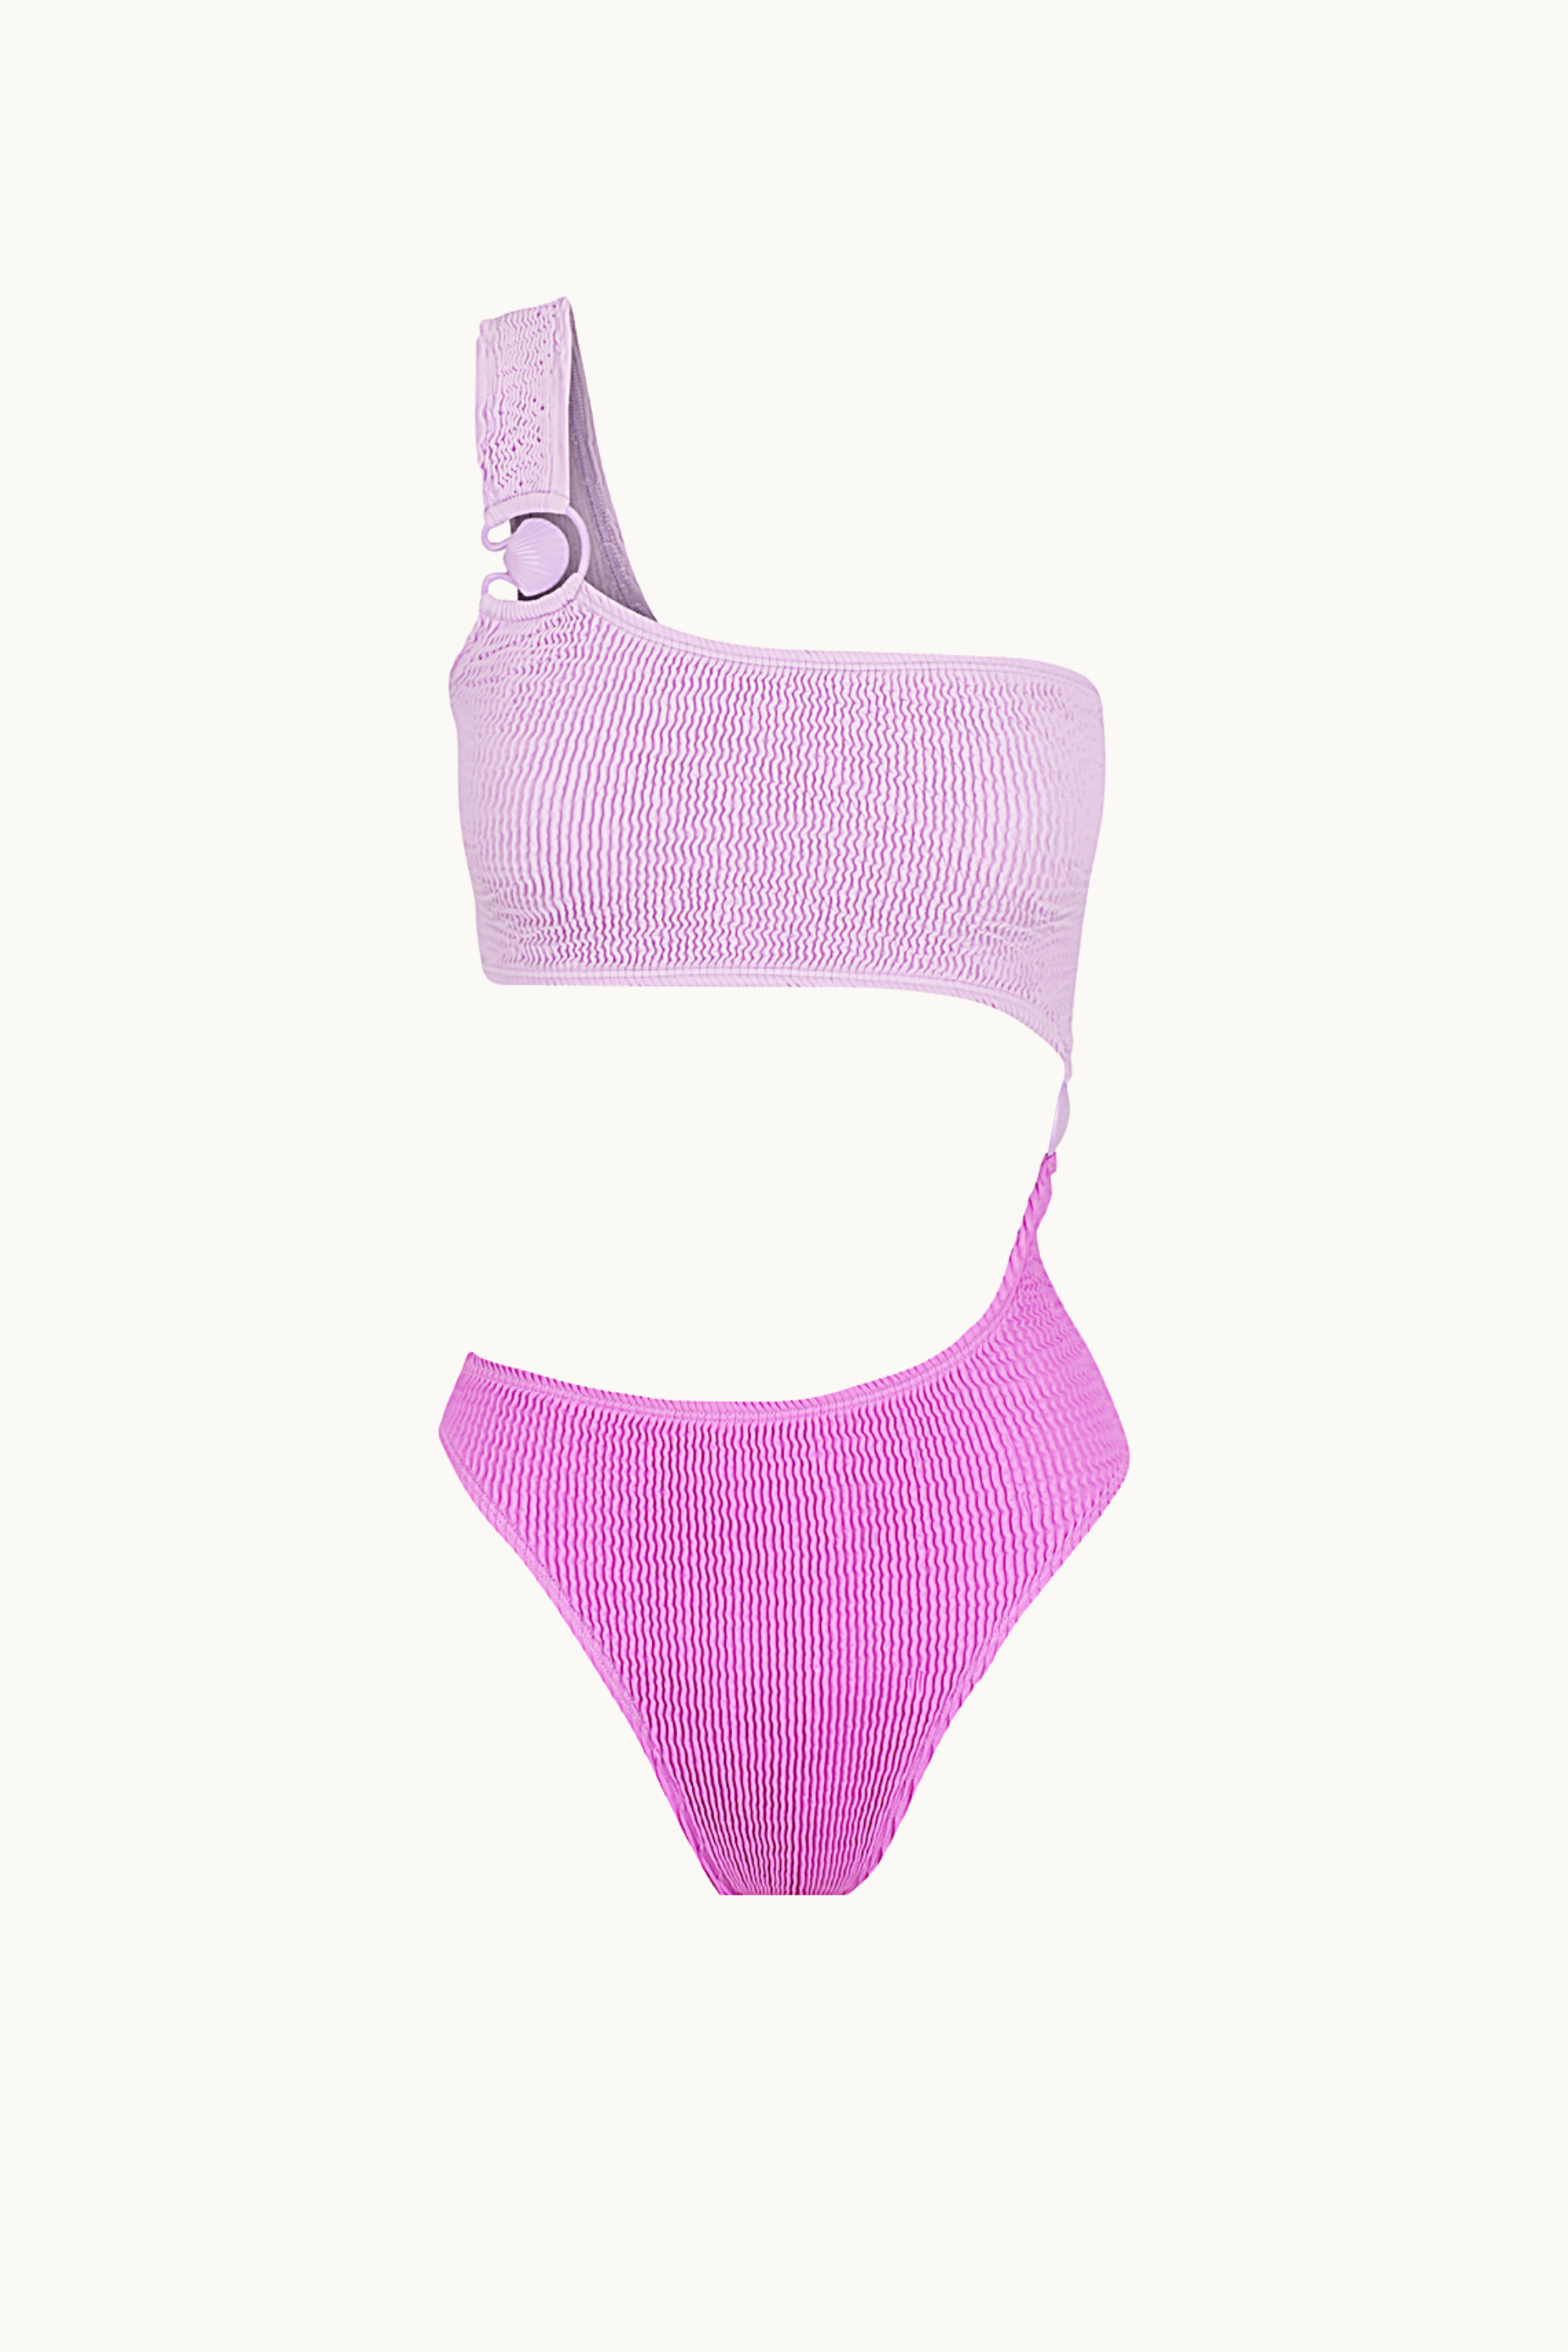 DANA MAILLOT LILAC AND VIOLET